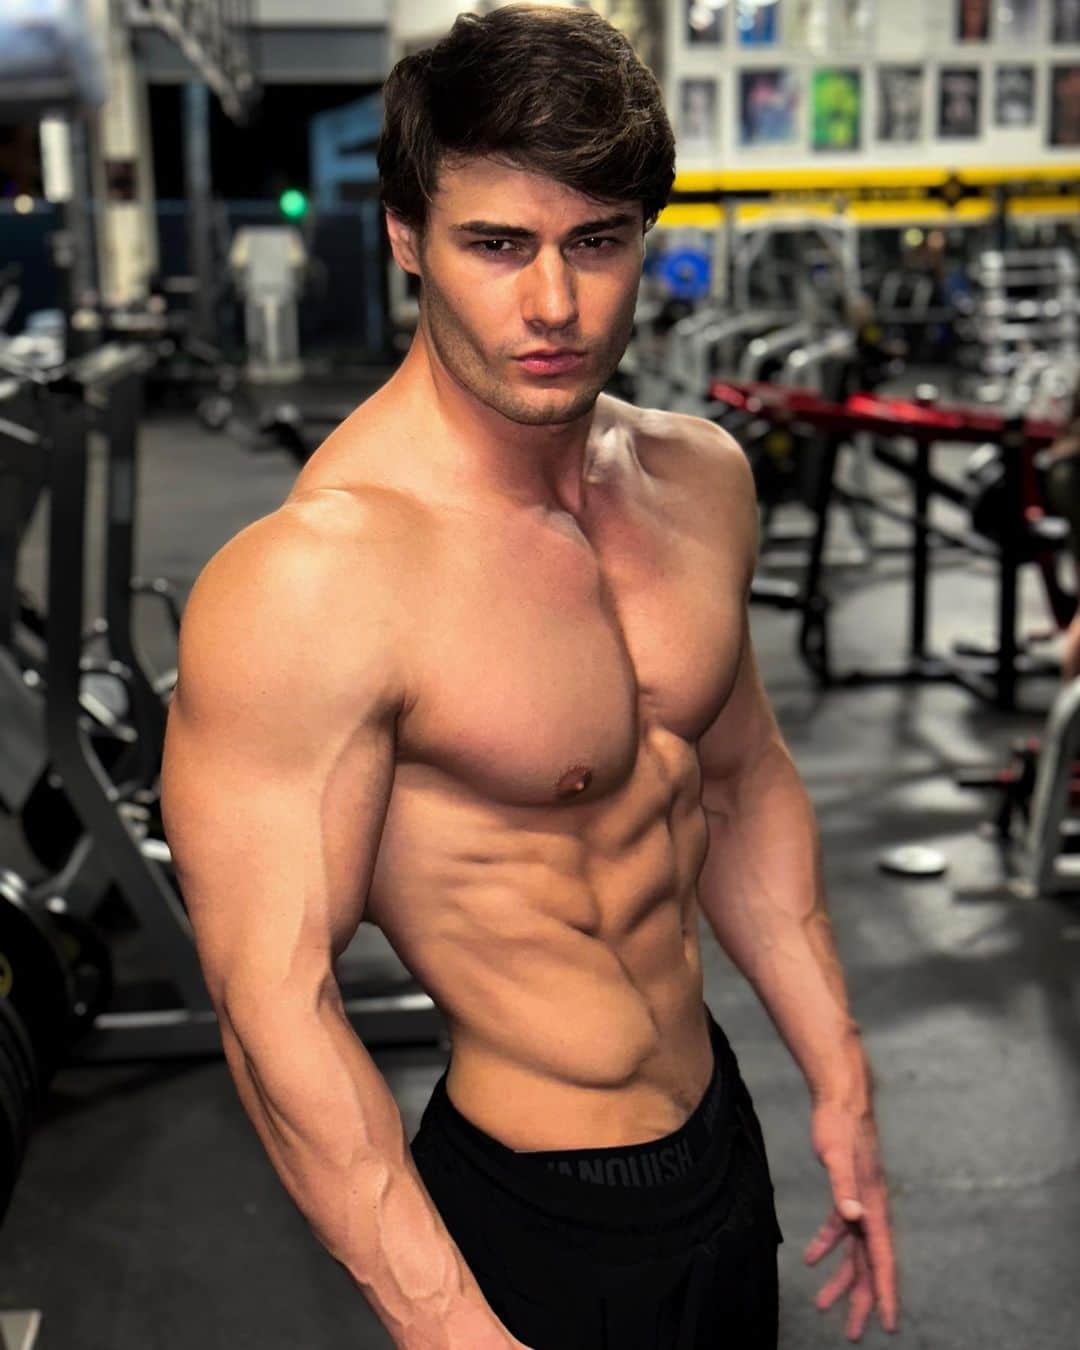 Jeff Seidのインスタグラム：「I’ve been training and dieting hard for my trip to England this weekend. Here’s a couple shots from my last workout today in America before I fly out.  It’s not easy being aesthetic but nothing worth having is easy. See you all this weekend at the @vqfit pop store in London.」